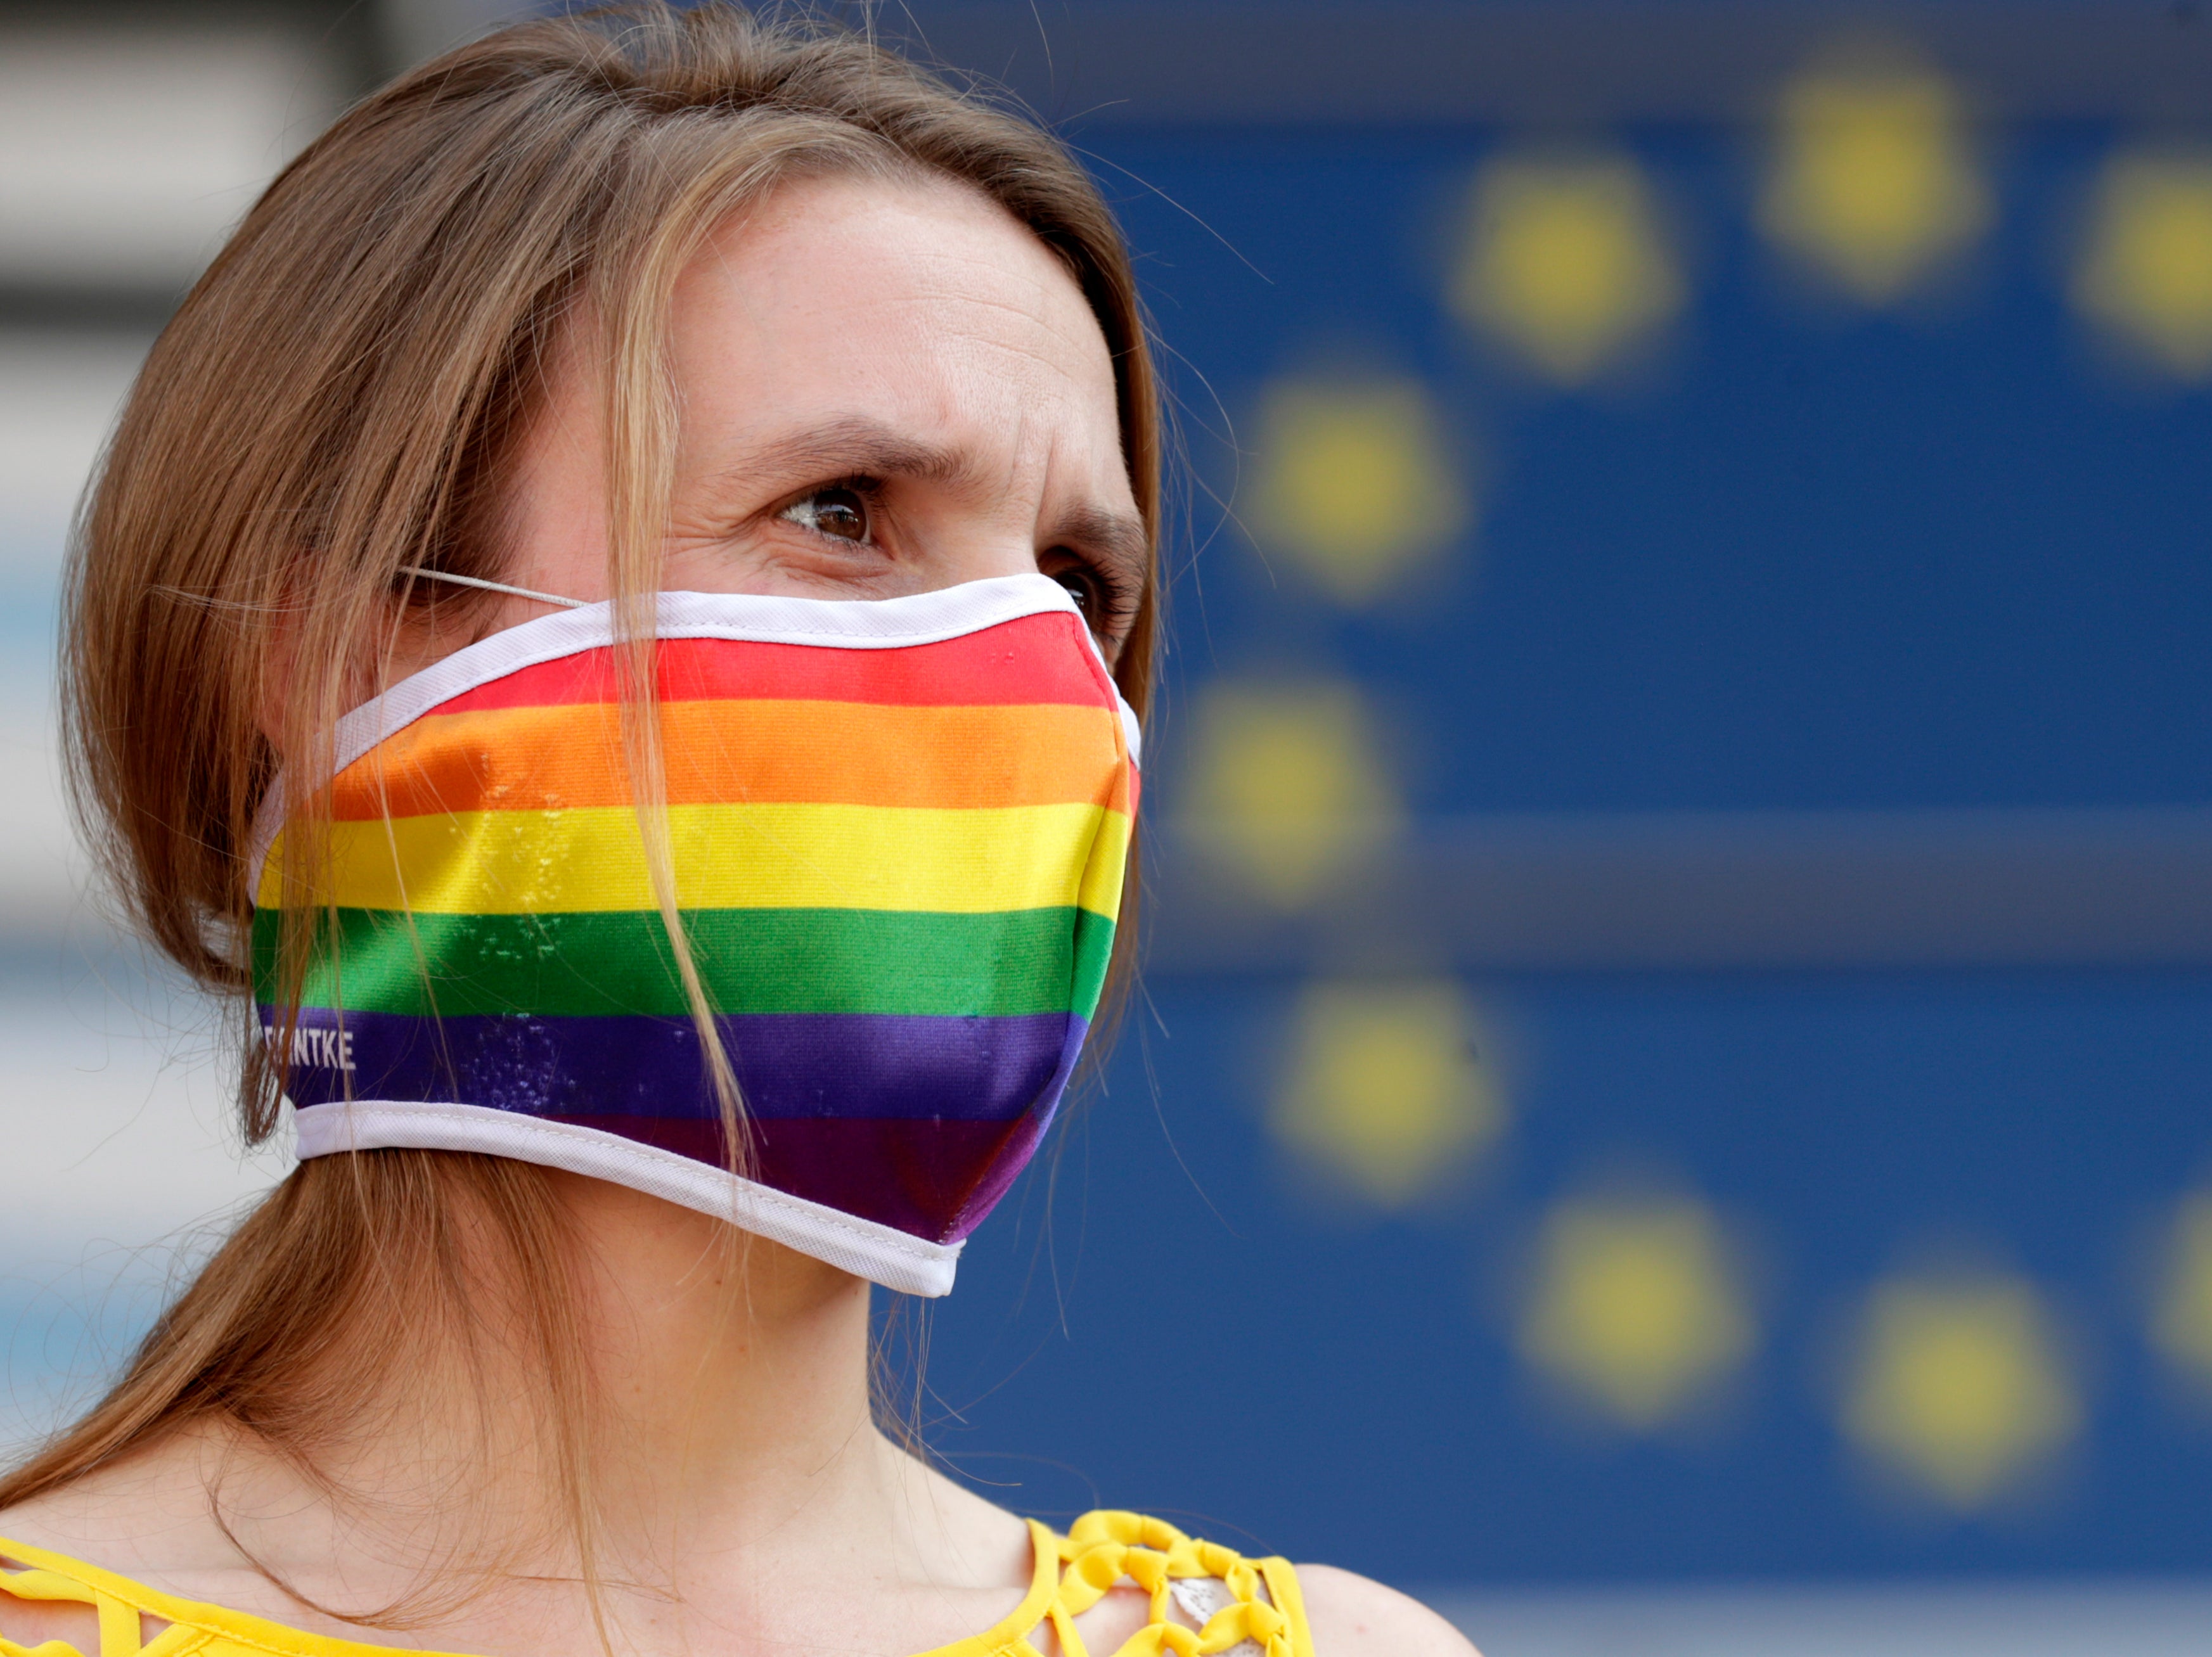 The EU has criticised Polish municipalities for declaring themselves LGBT-free zones